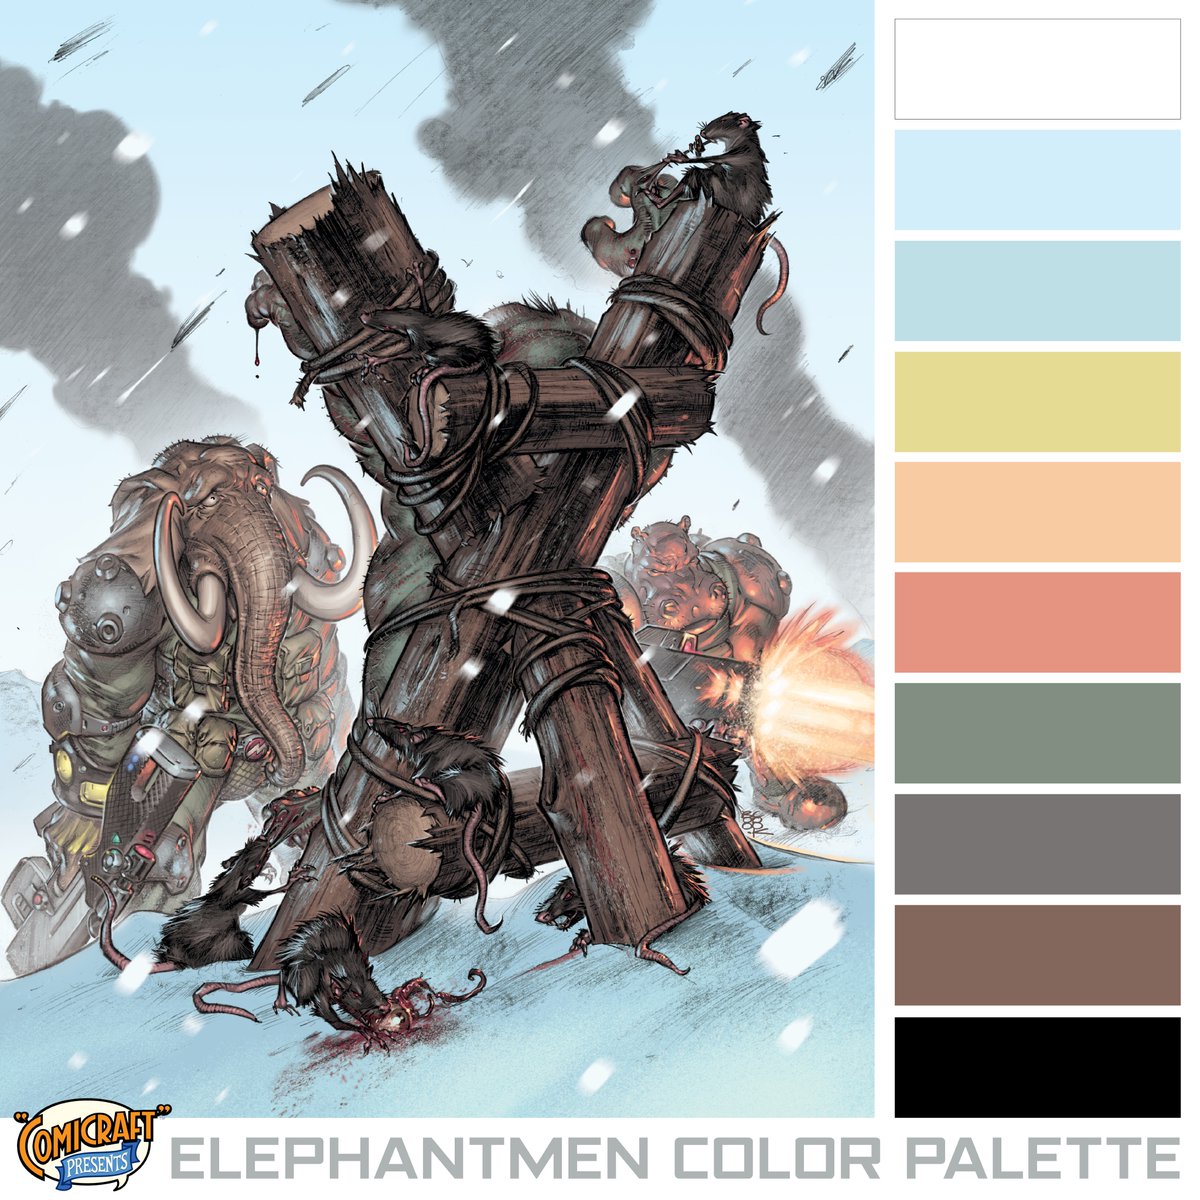 Elephantmen 2261 Season One: The Death of Shorty #1 Written & Created by: @RichStarkings Illustrated by: @AxelMedellin Featured Art: Boo Cook Issue one available digitally on Amazon: amazon.com/gp/product/B07…� #comics #elephantmen #sciencefiction #hipflask #comicraft